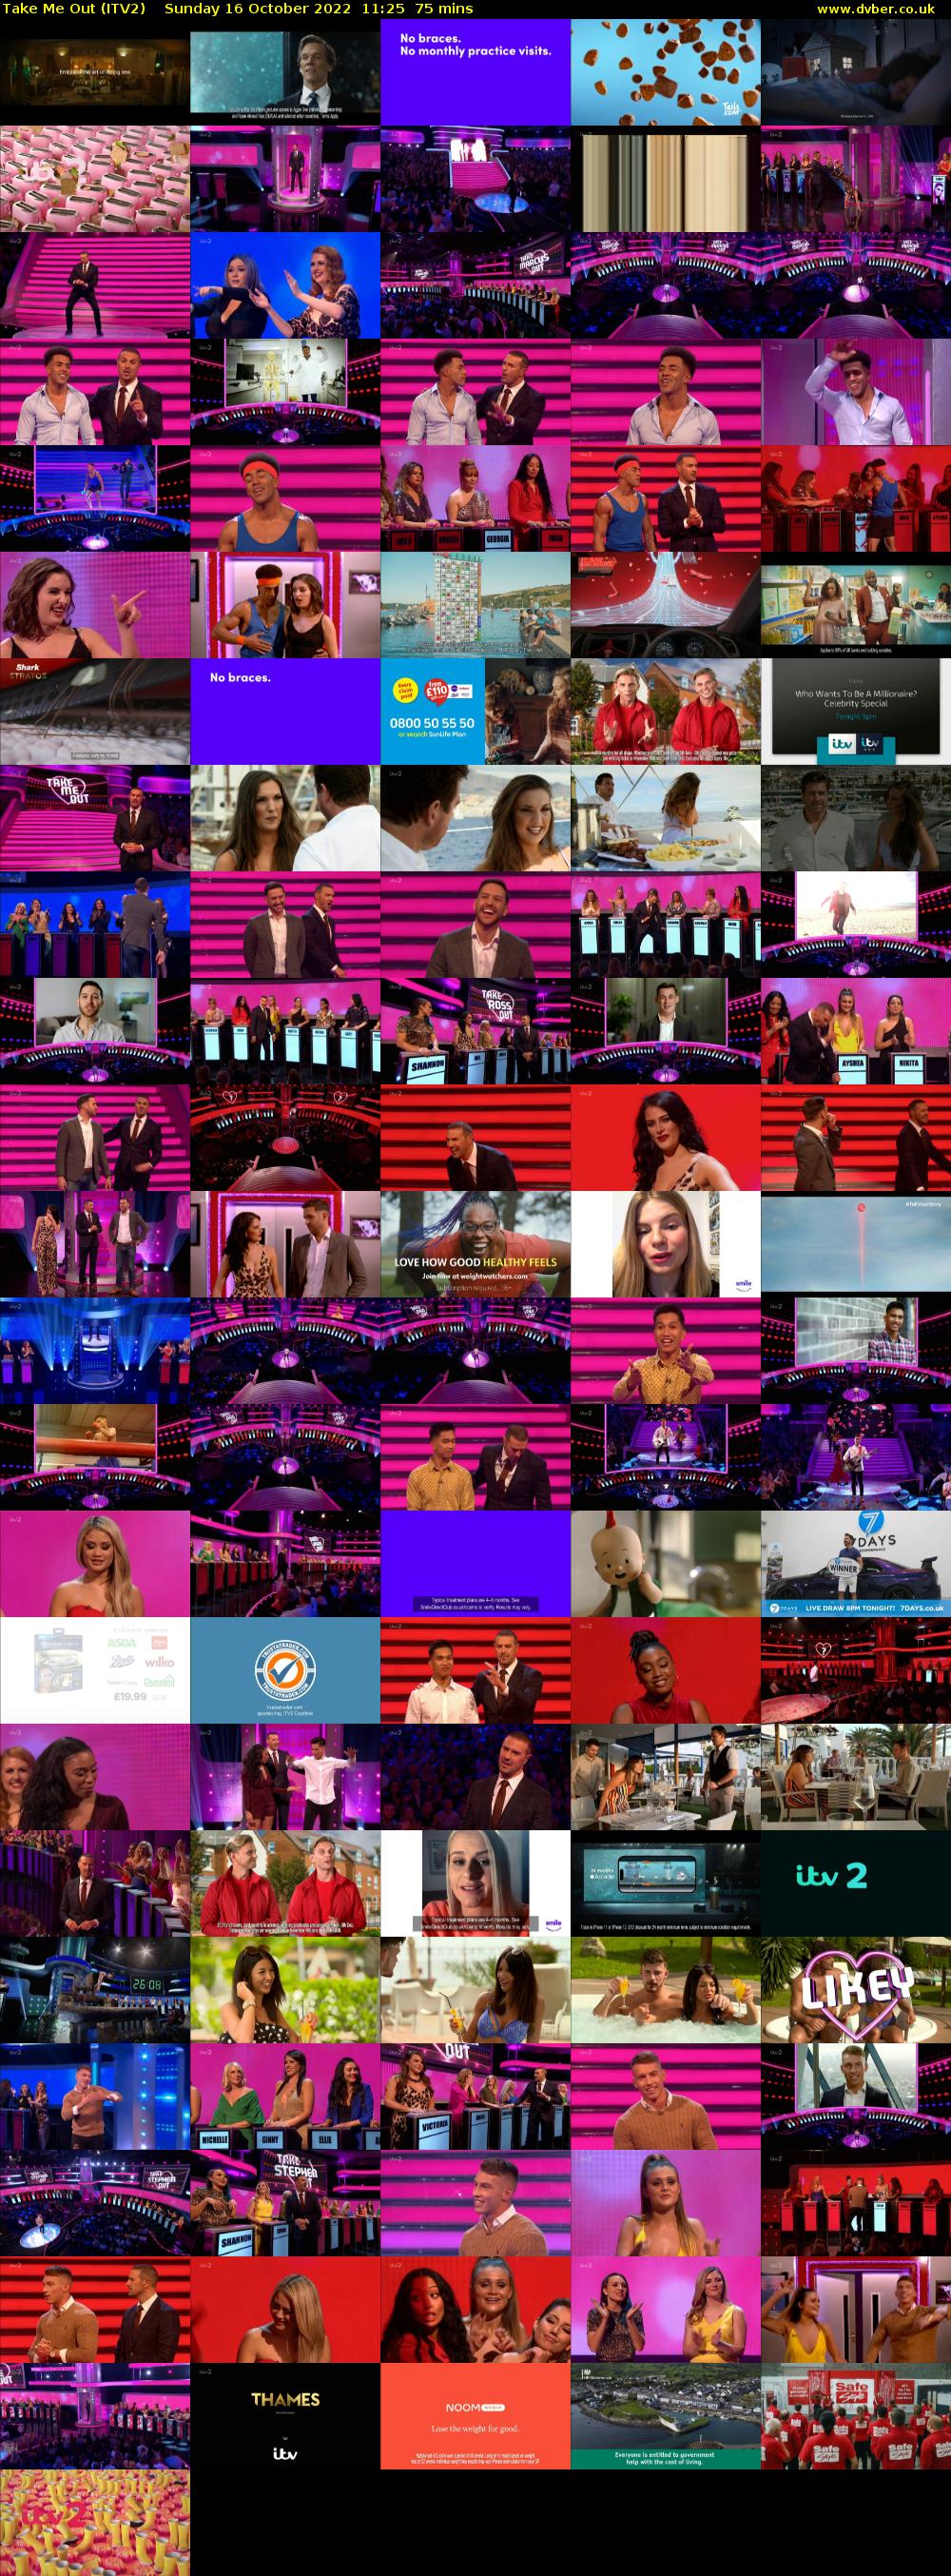 Take Me Out (ITV2) Sunday 16 October 2022 11:25 - 12:40